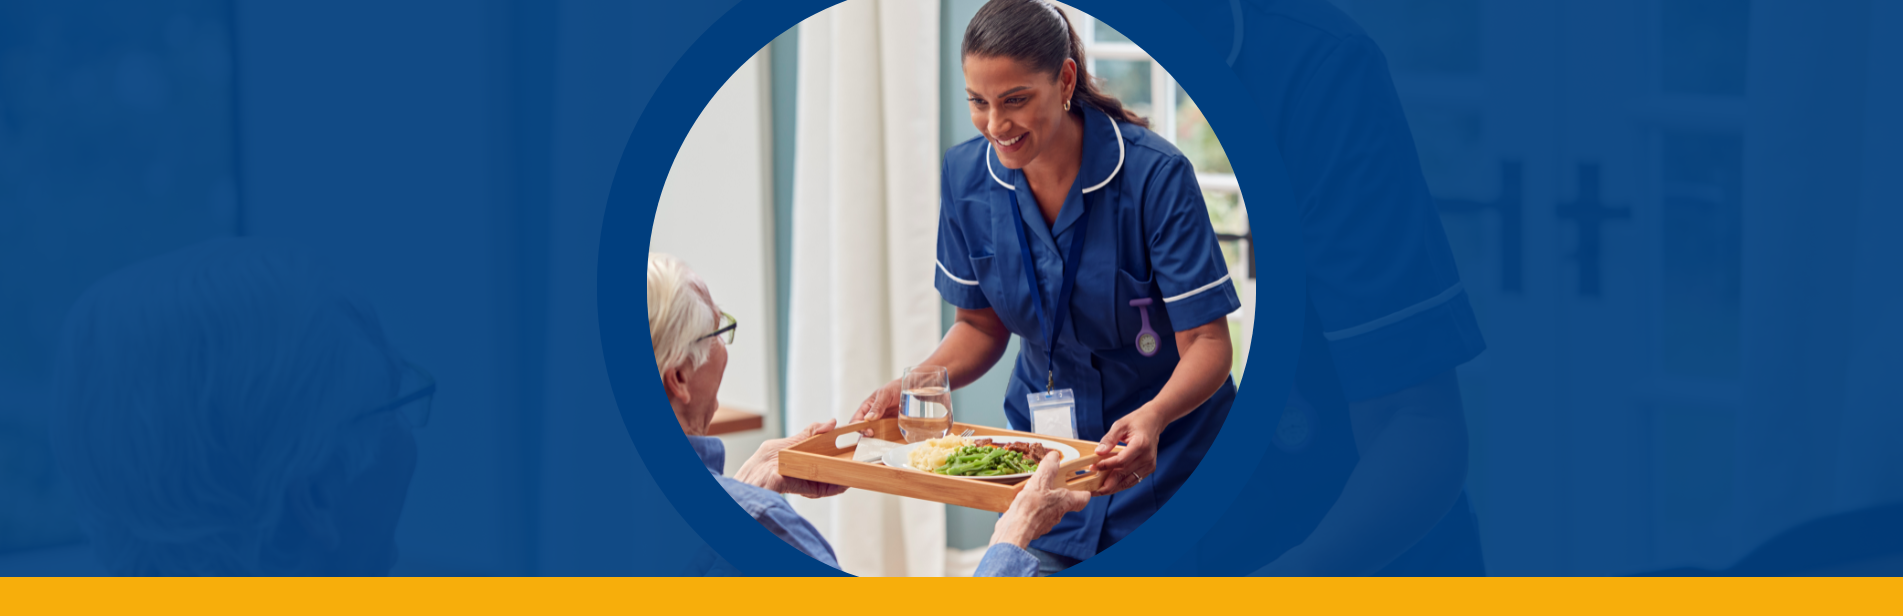 The Importance of Nutrition in Homecare